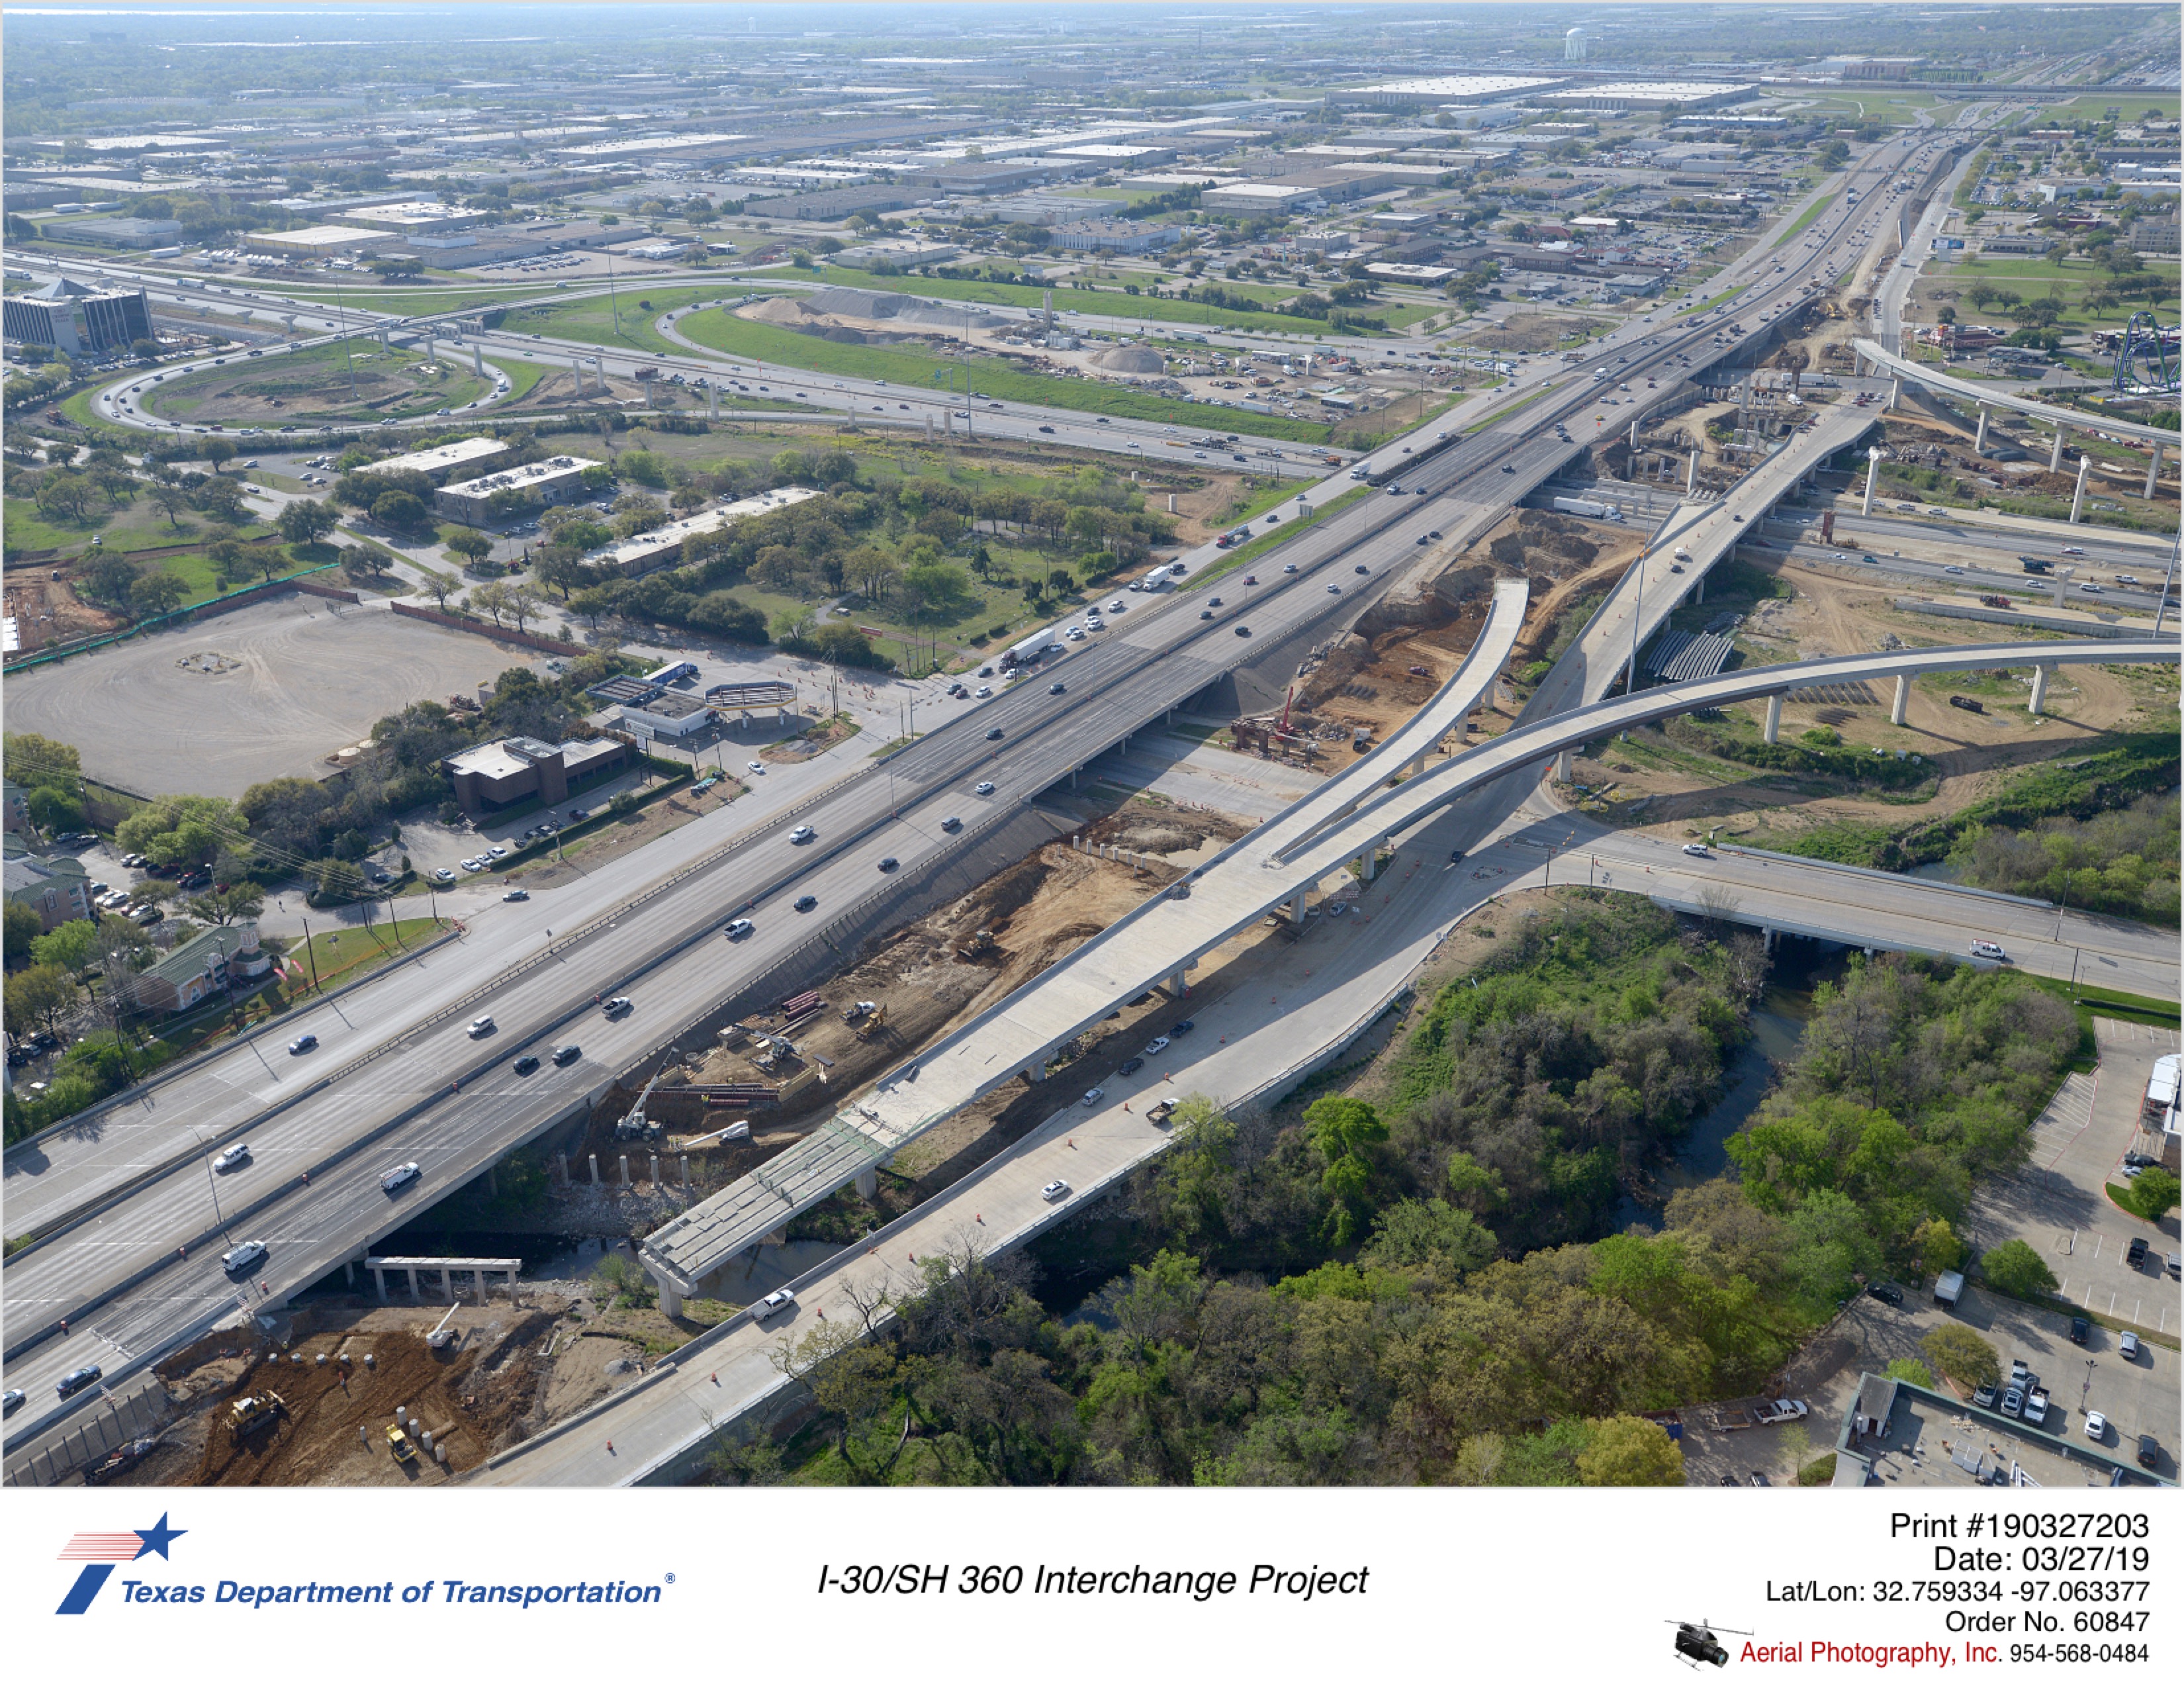 I-30/SH 360 interchange looking southwest with Lamar Boulevard and southbound bound frontage road intersection in mid-ground.